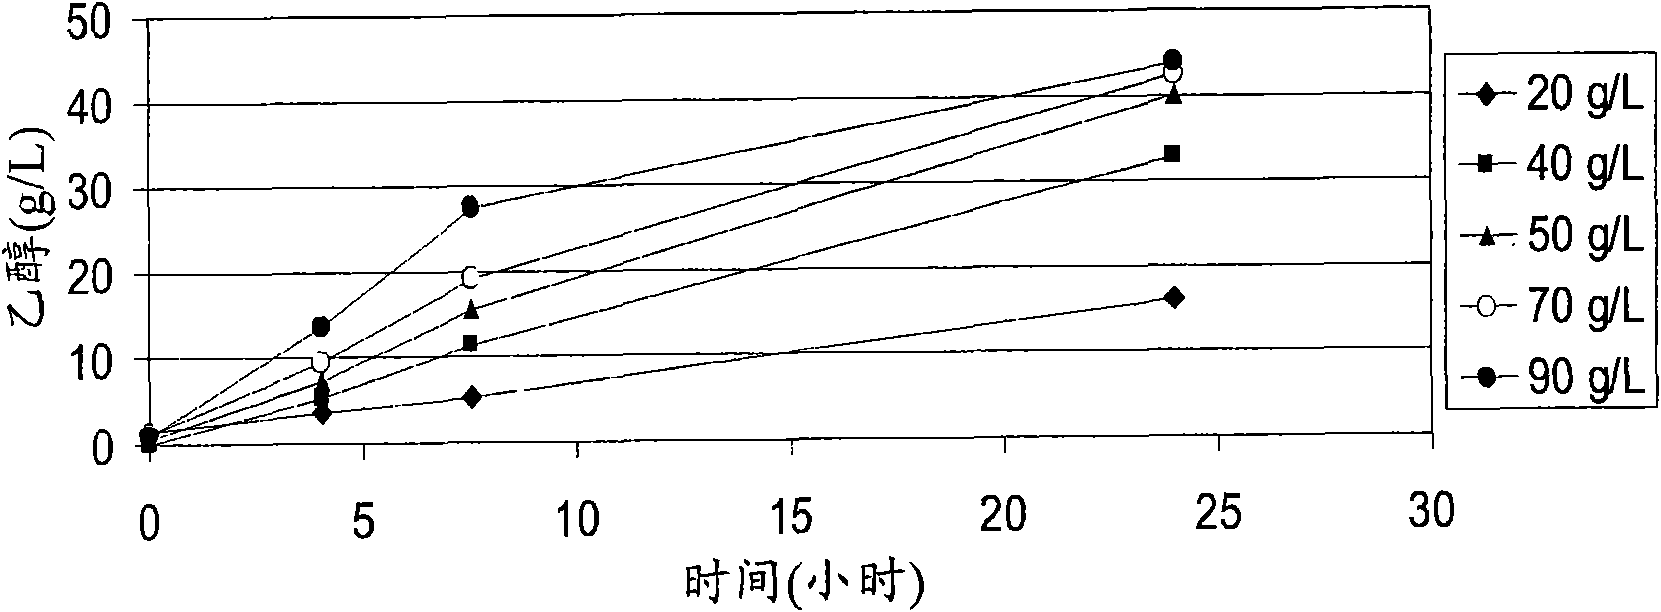 Methods for producing fermentation products